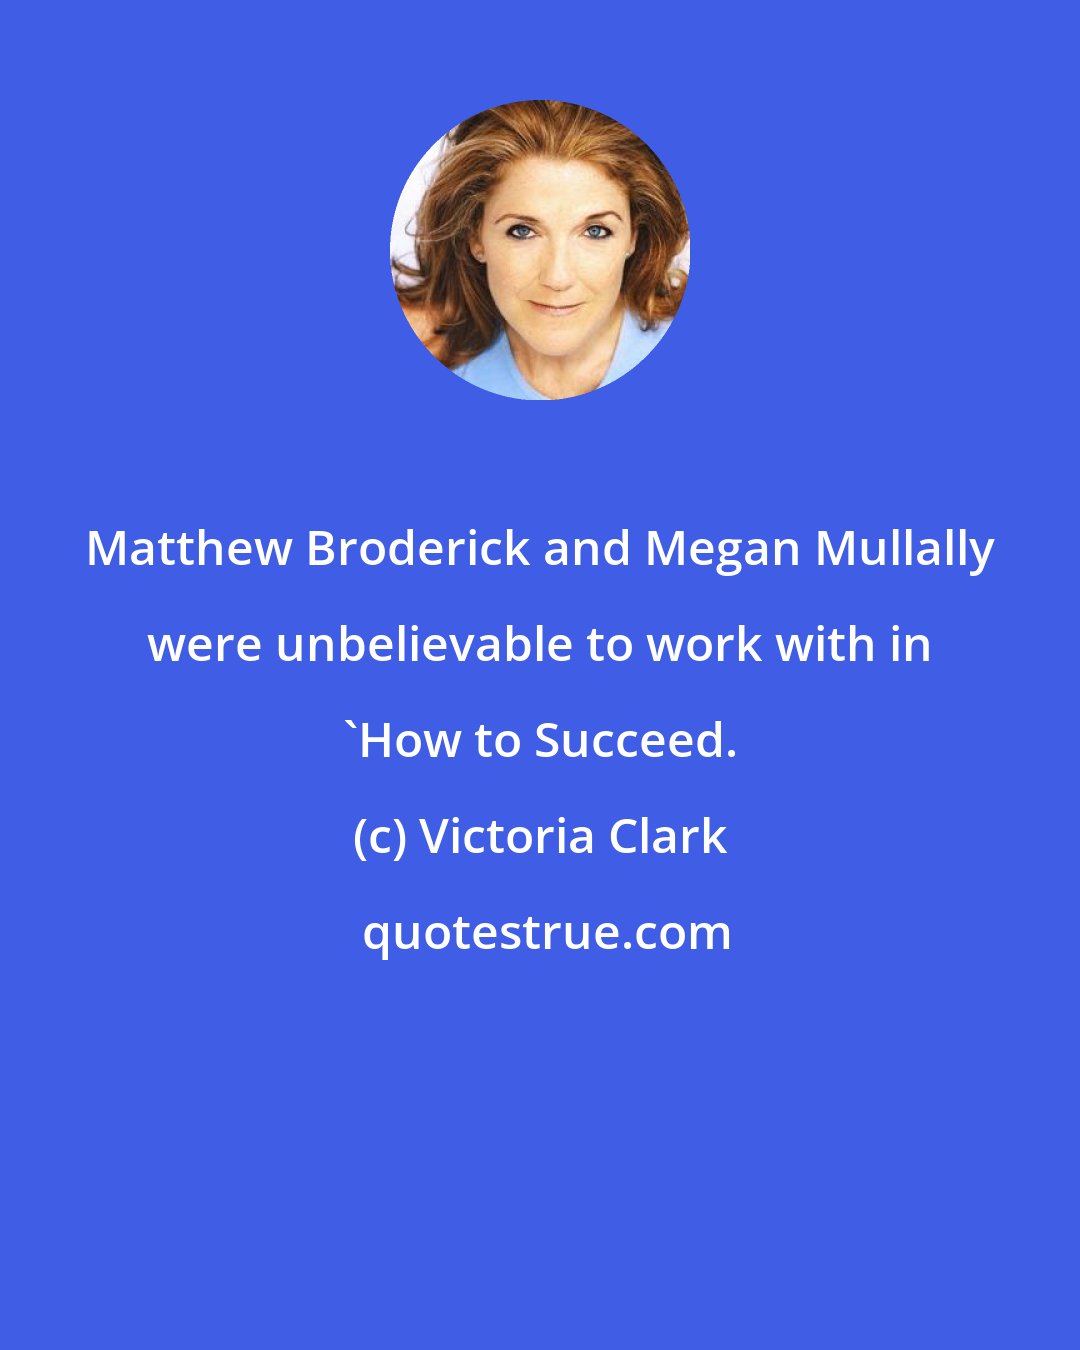 Victoria Clark: Matthew Broderick and Megan Mullally were unbelievable to work with in 'How to Succeed.